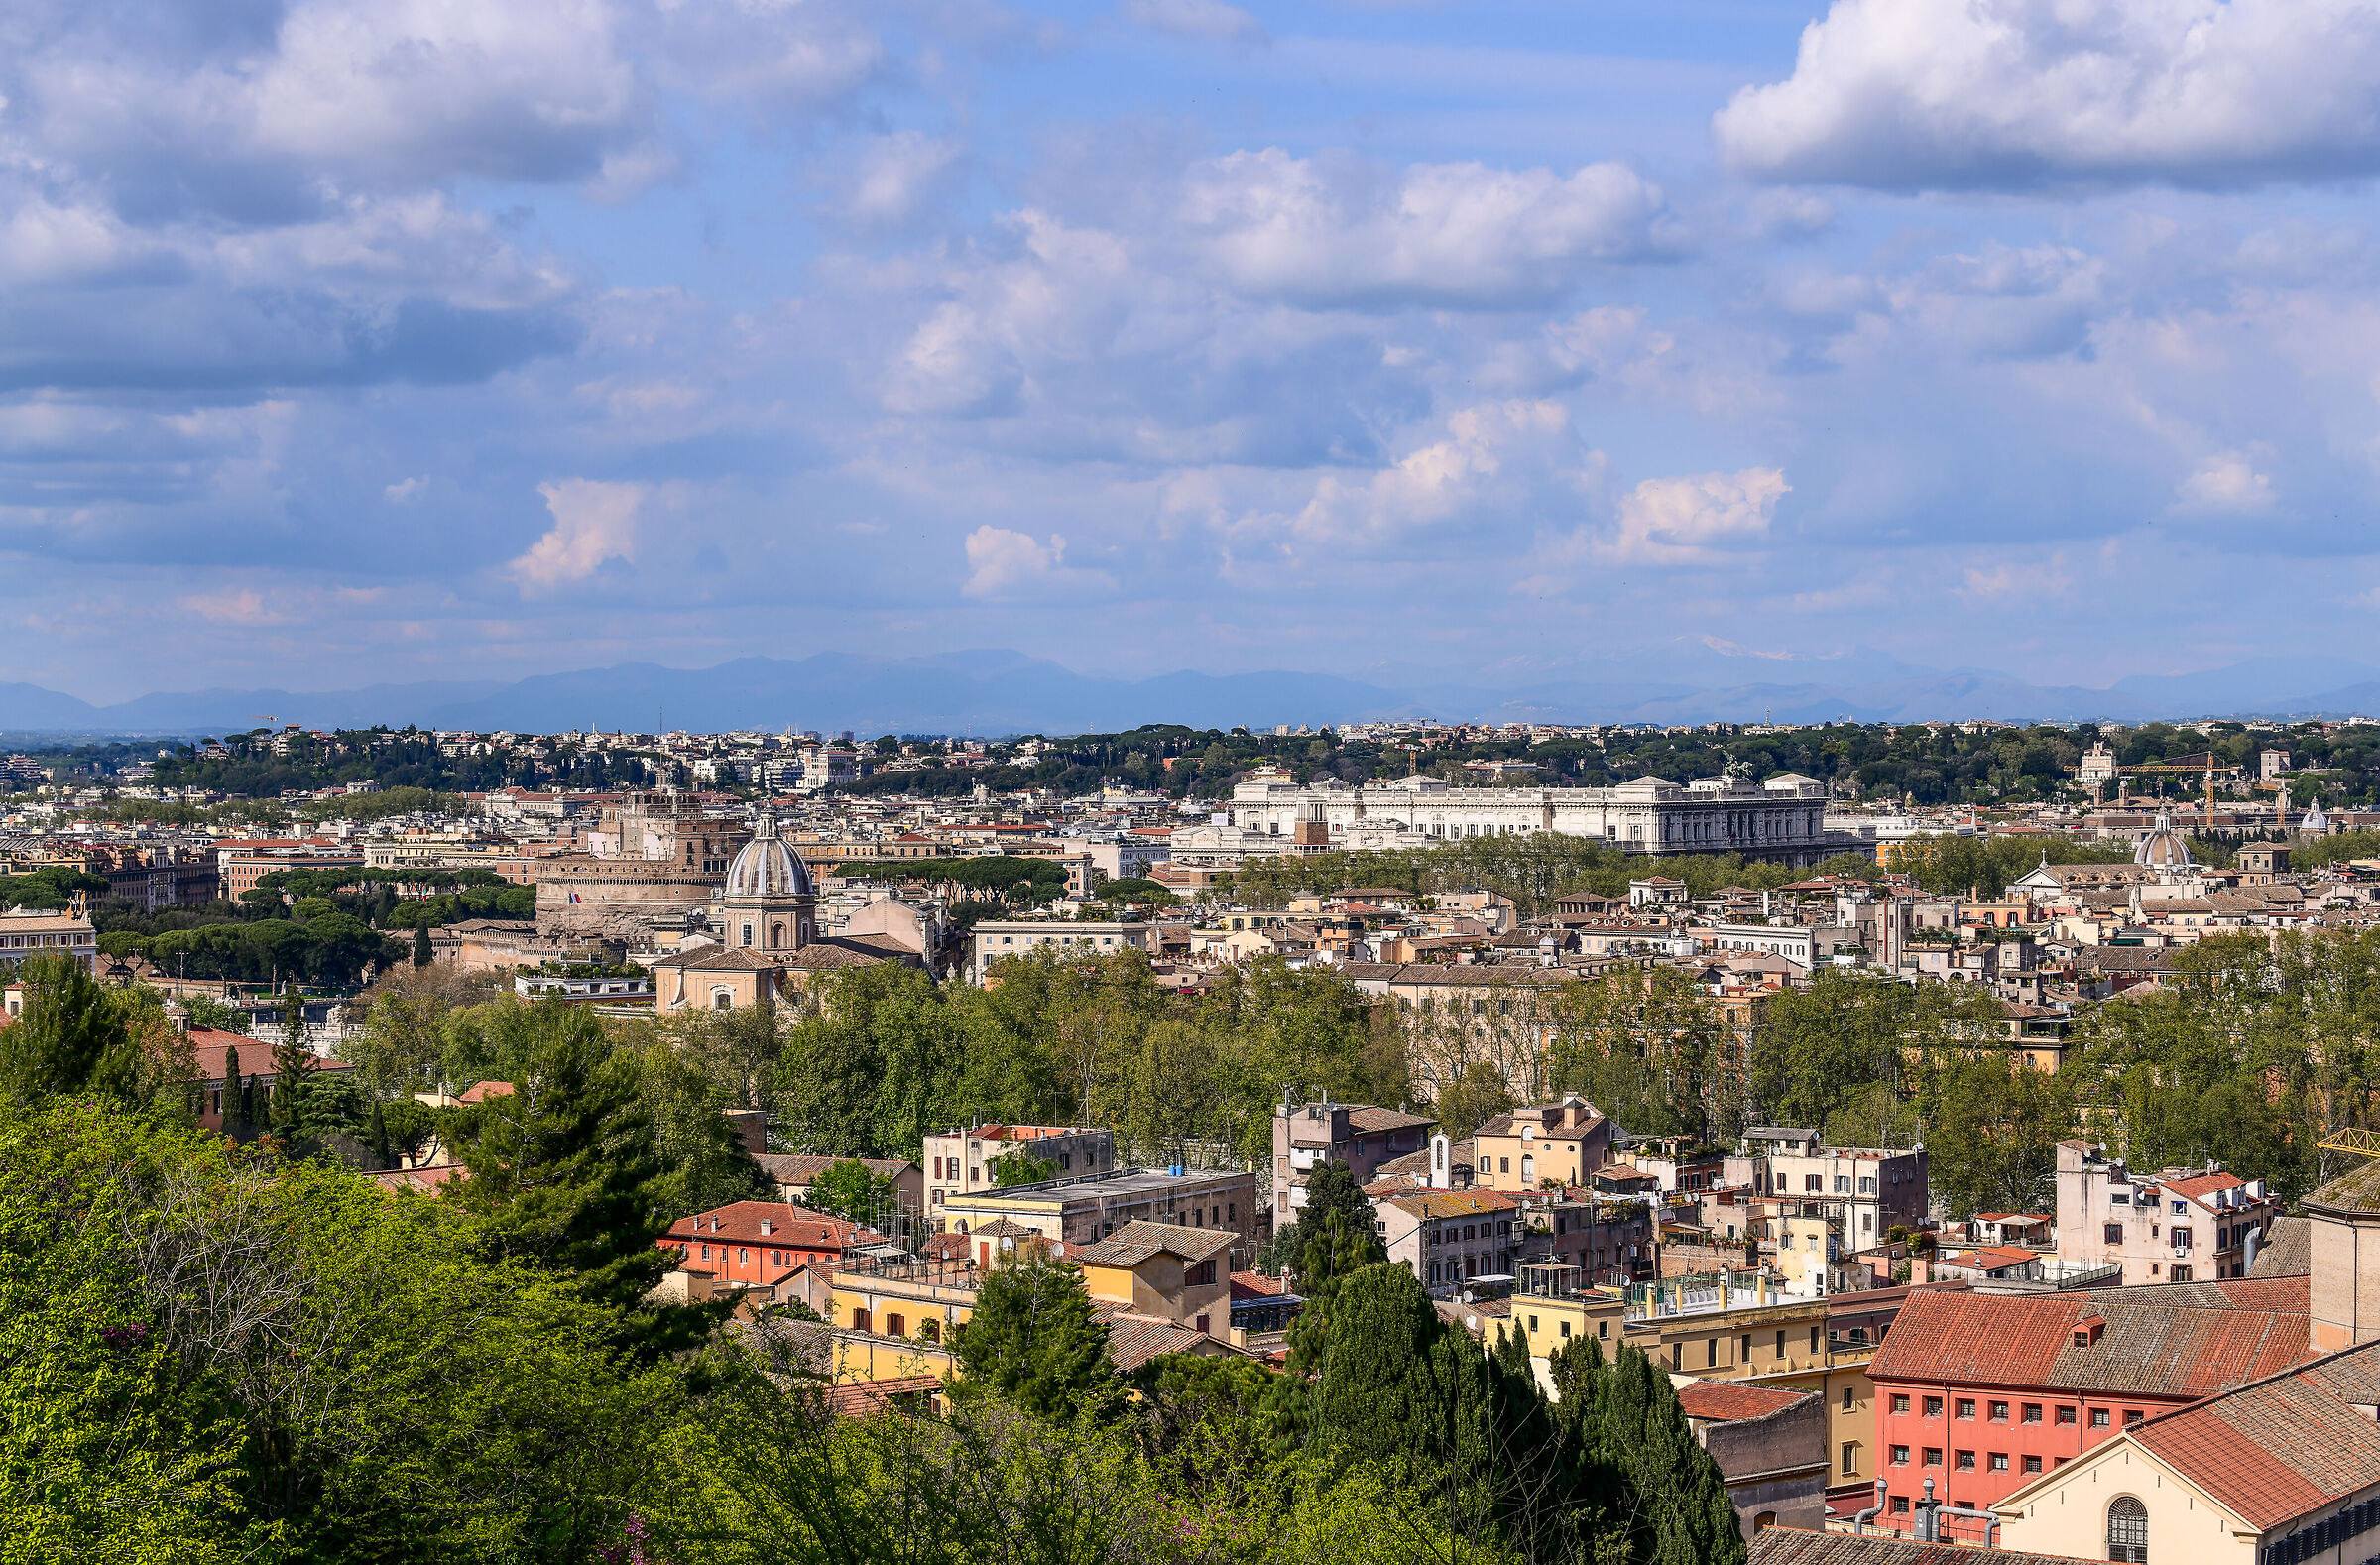 A part of Rome from the Janiculum...